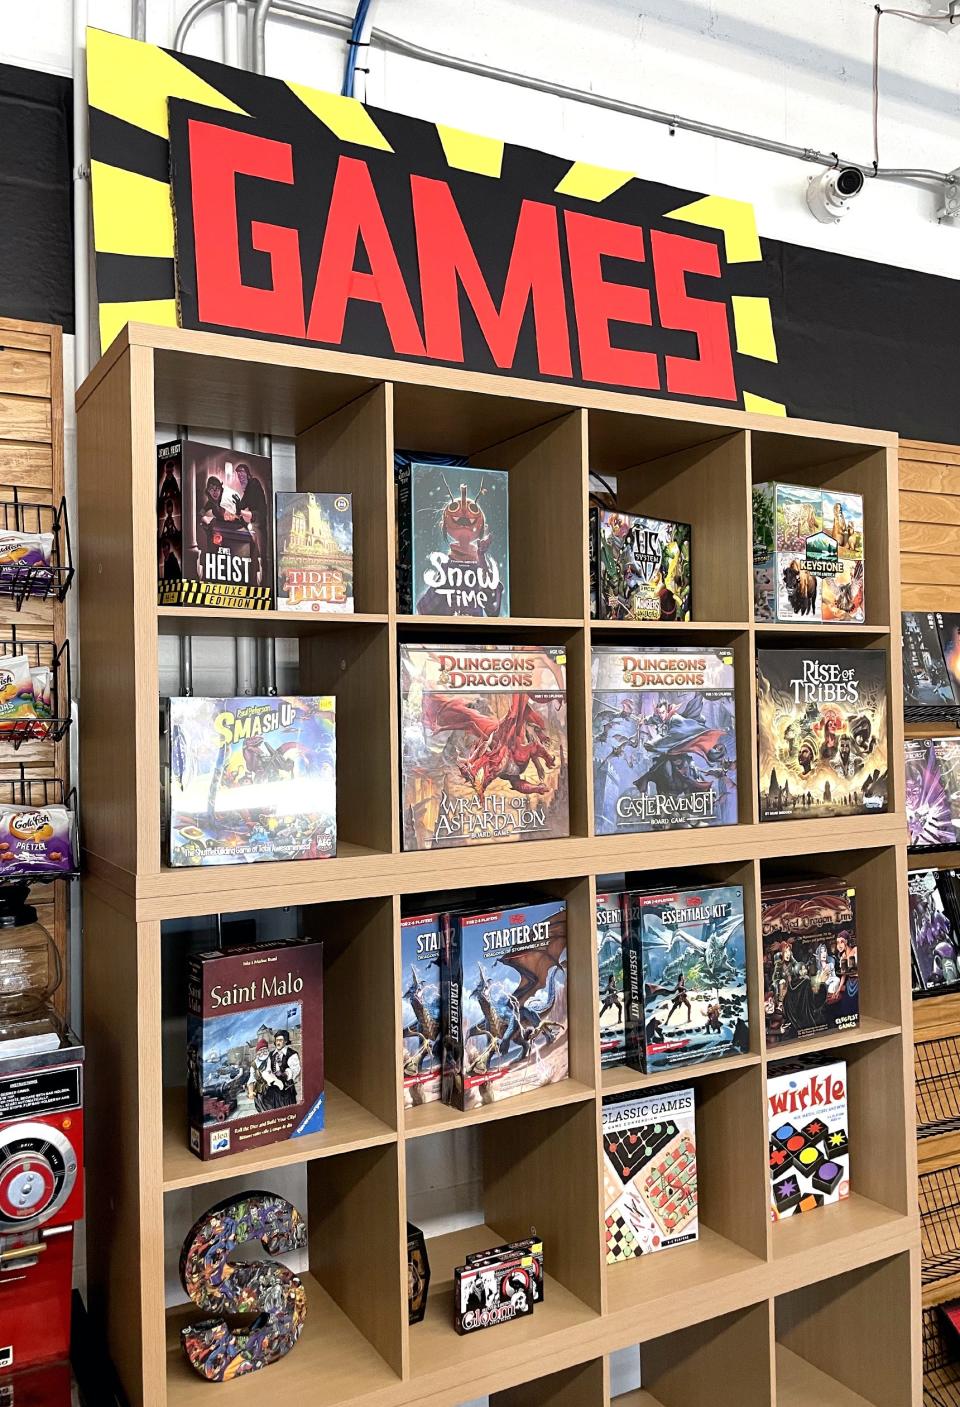 Sets of Dungeons & Dragons, a fantasy role-playing game, are featured on shelves, along with other games at Sanctuary Comics & Games in Edmond.